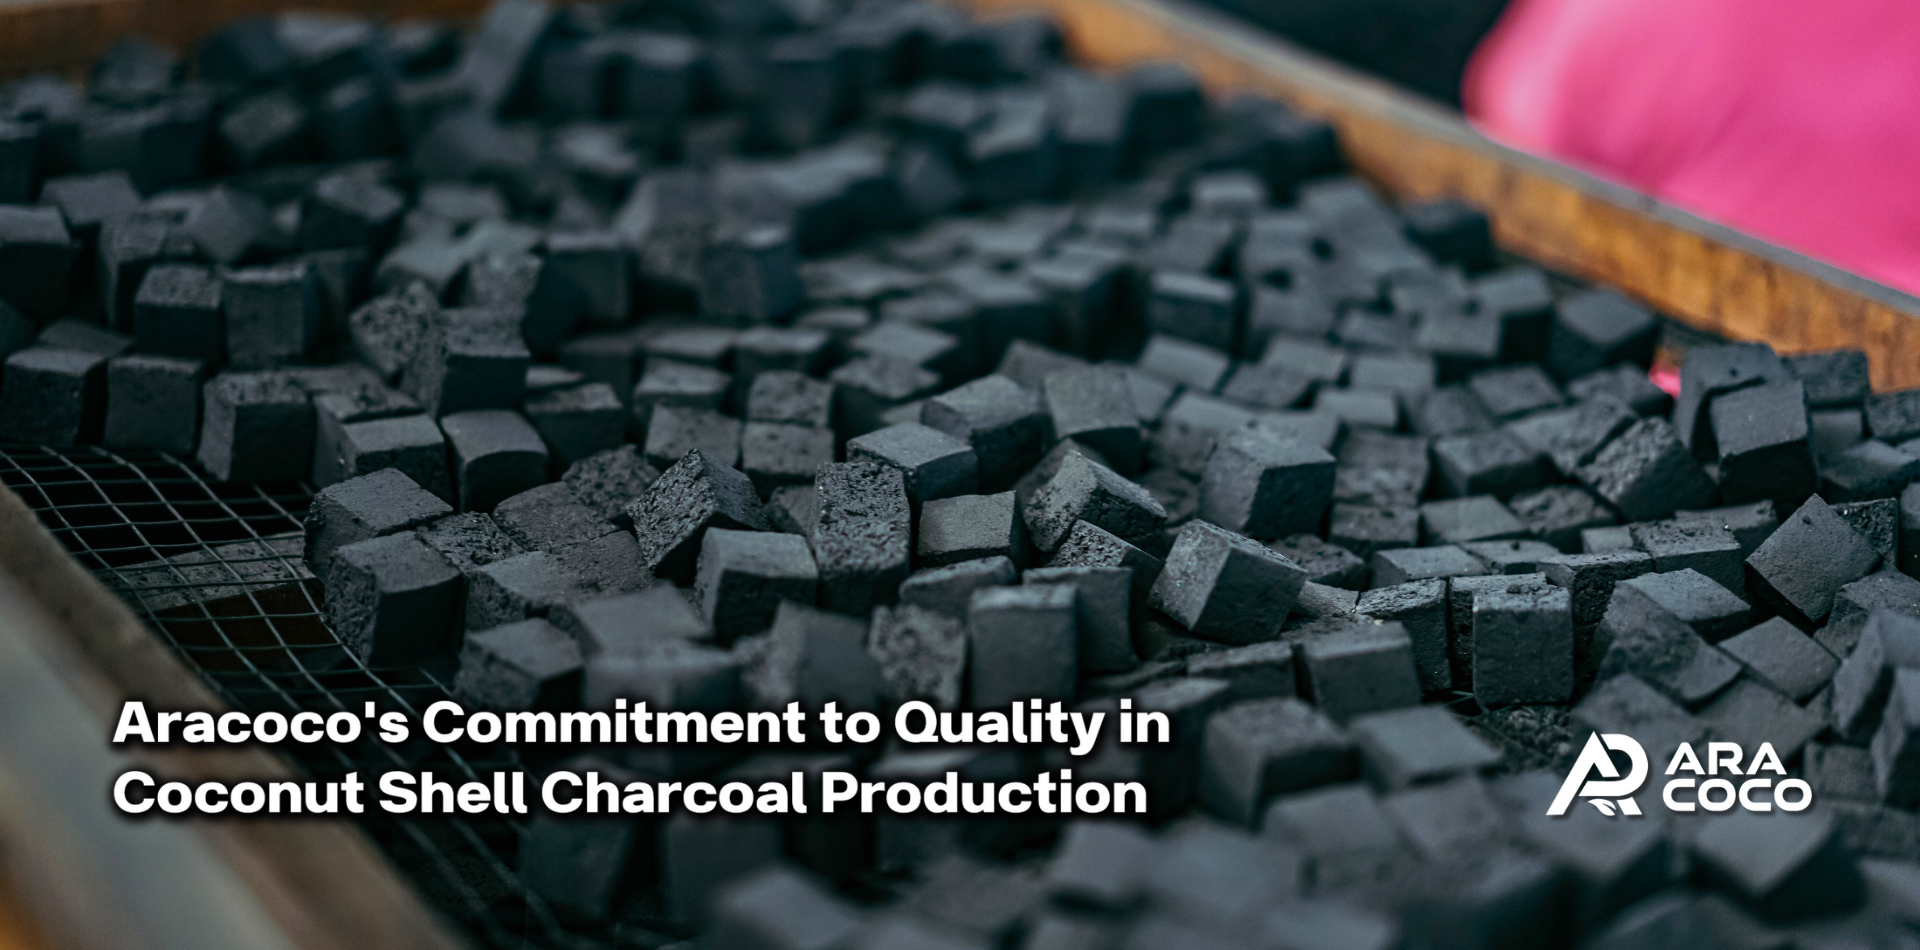 Aracoco's Commitment to Quality in Coconut Shell Charcoal Production